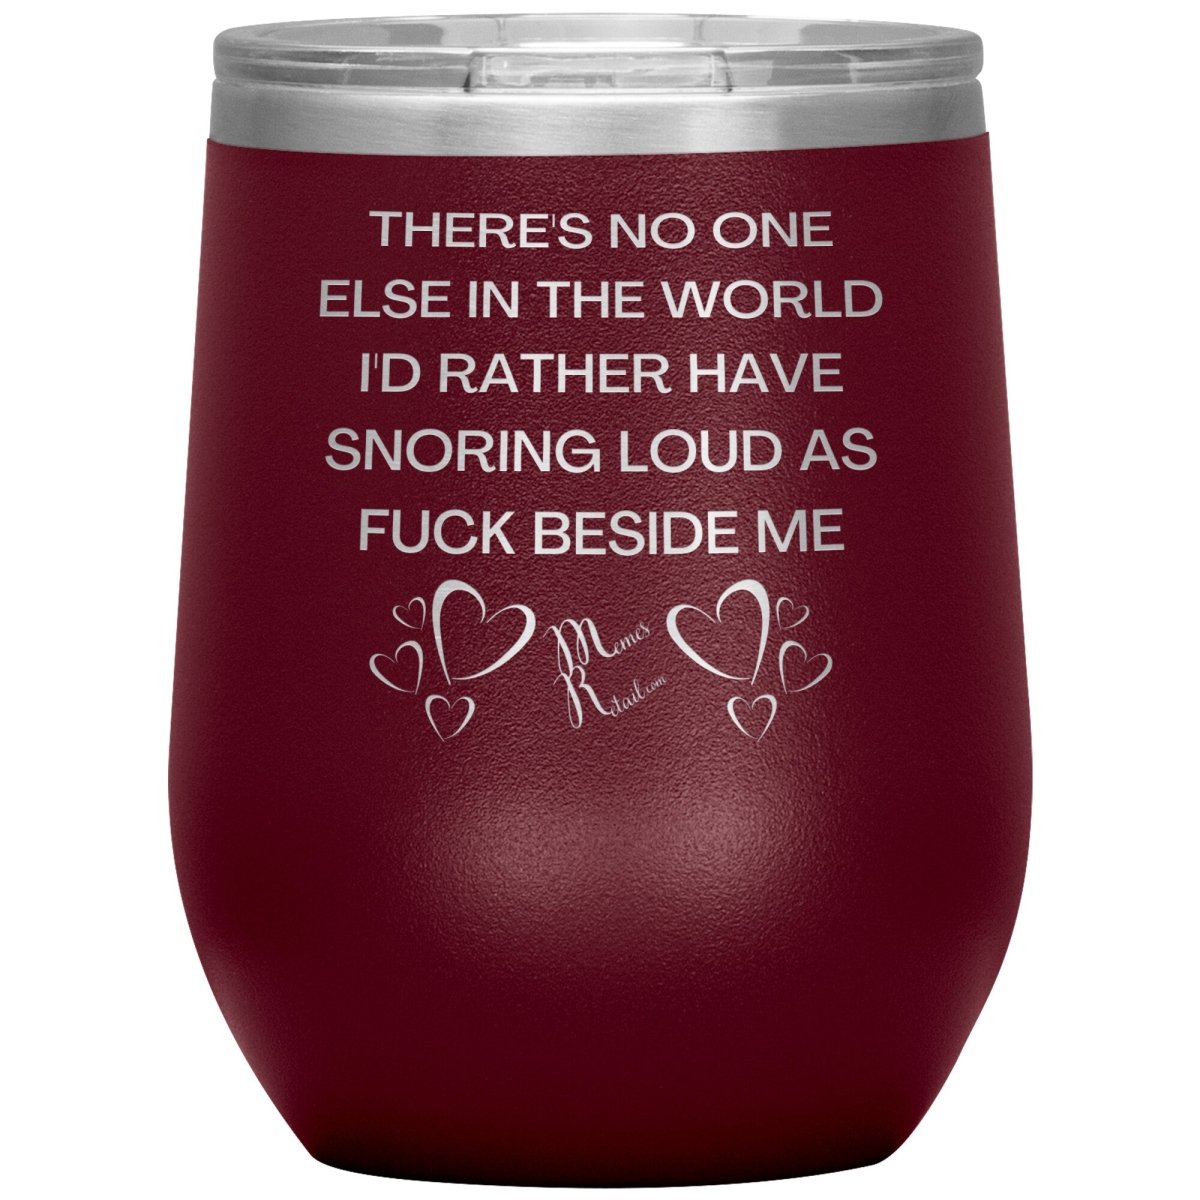 There's No One Else in the World I'd Rather Have Snoring Loud, 12oz Wine Insulated Tumbler / Maroon - MemesRetail.com